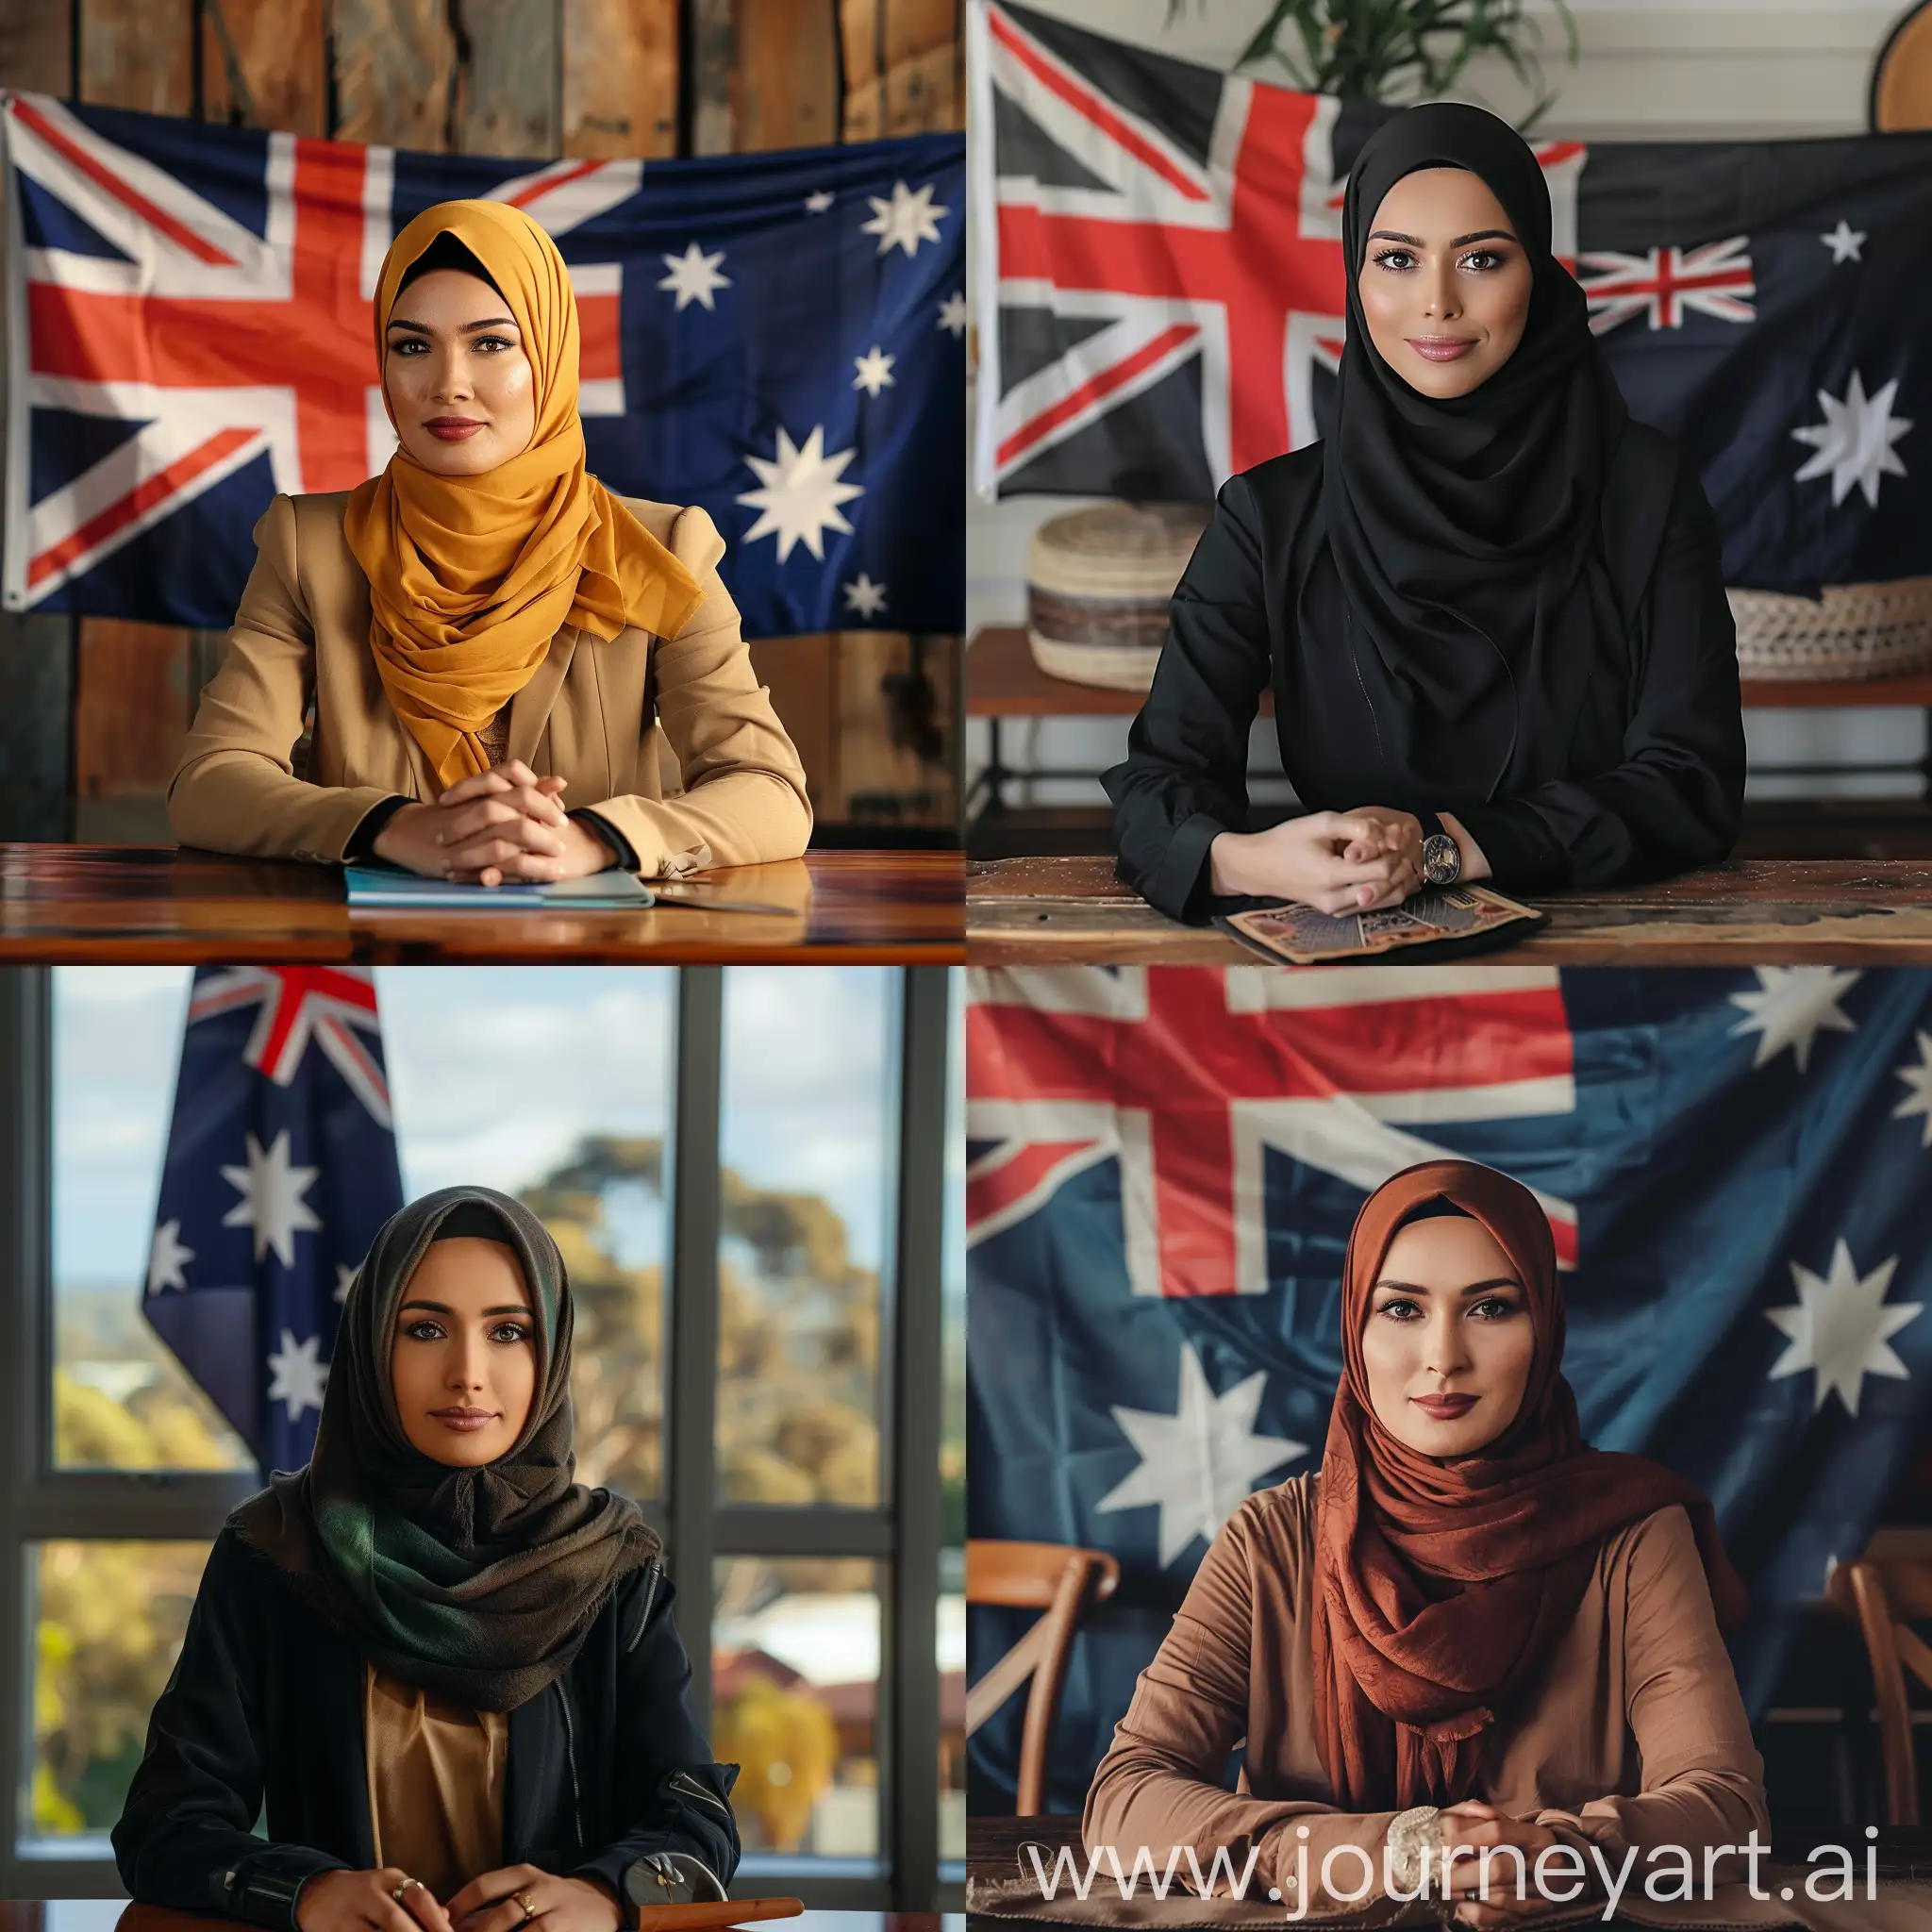 Charismatic-Woman-in-Hijab-with-Australian-Flag-Background